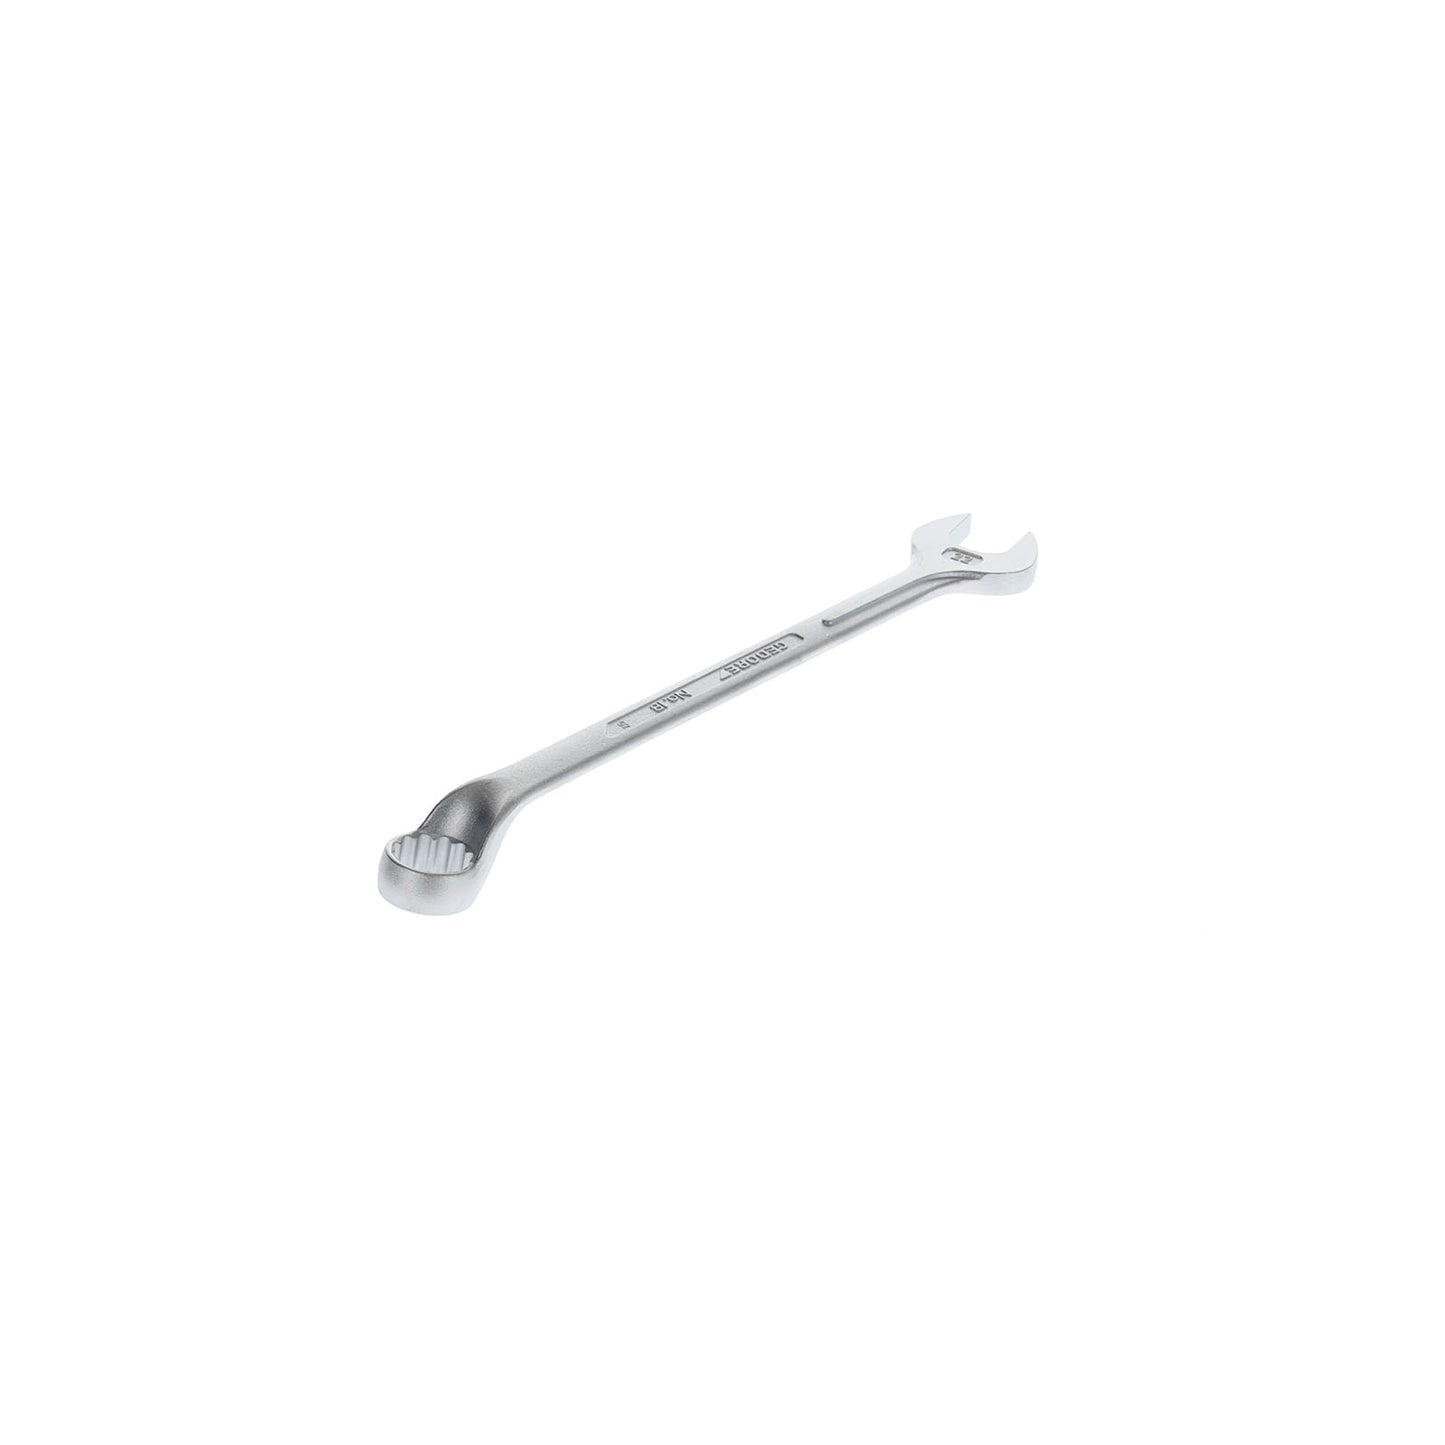 GEDORE 1 B 22 - Offset Combination Wrench, 22mm (6002100)